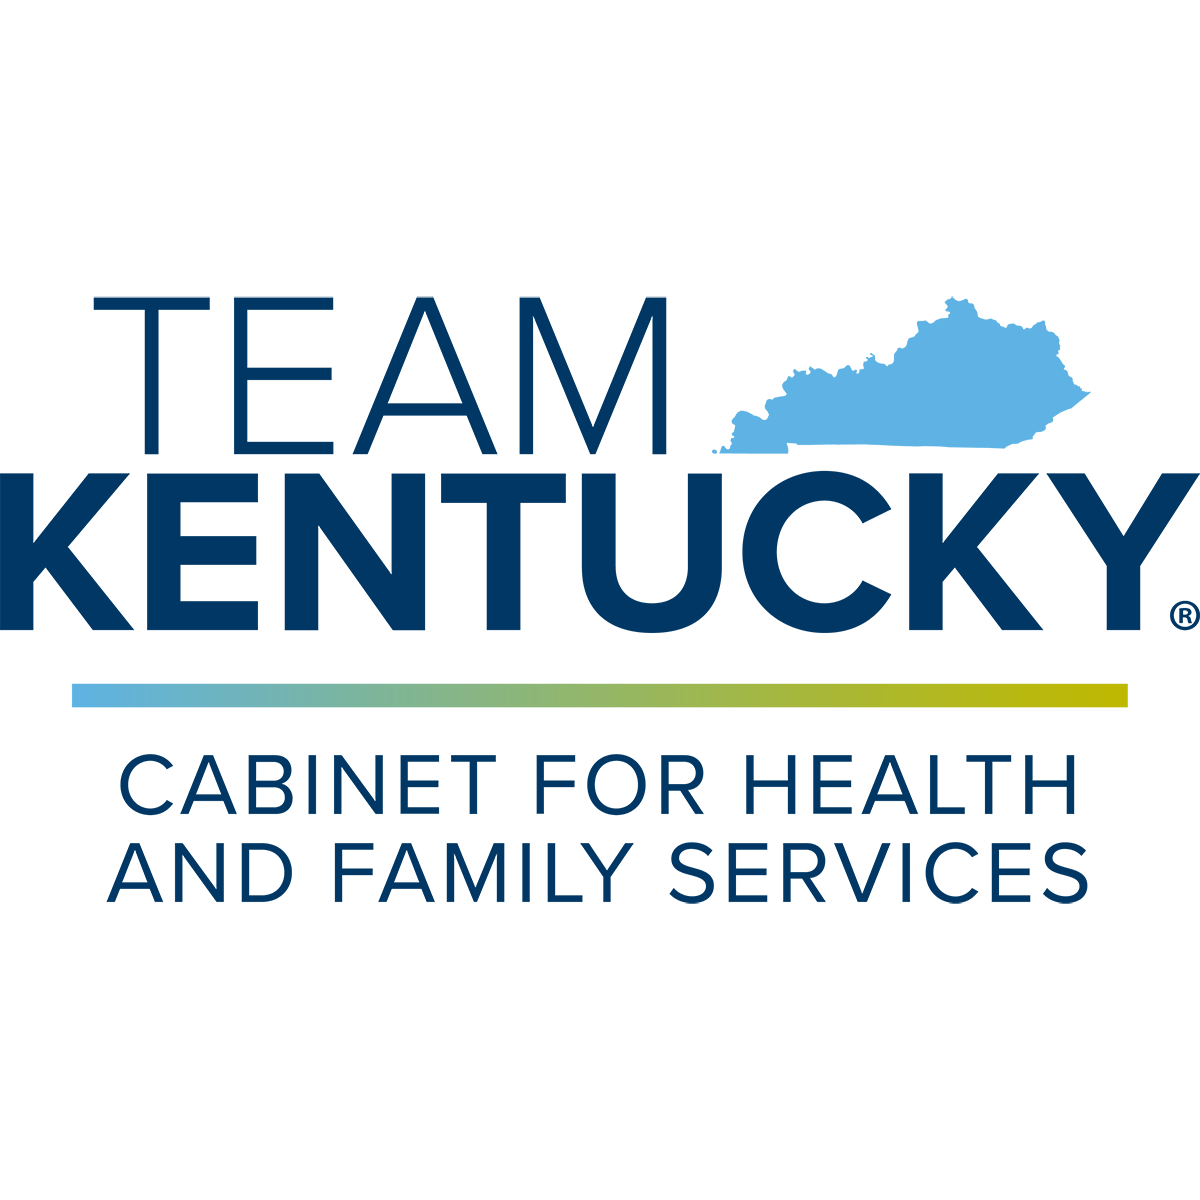 Kentucky Cabinet for Health and Family Services Logo